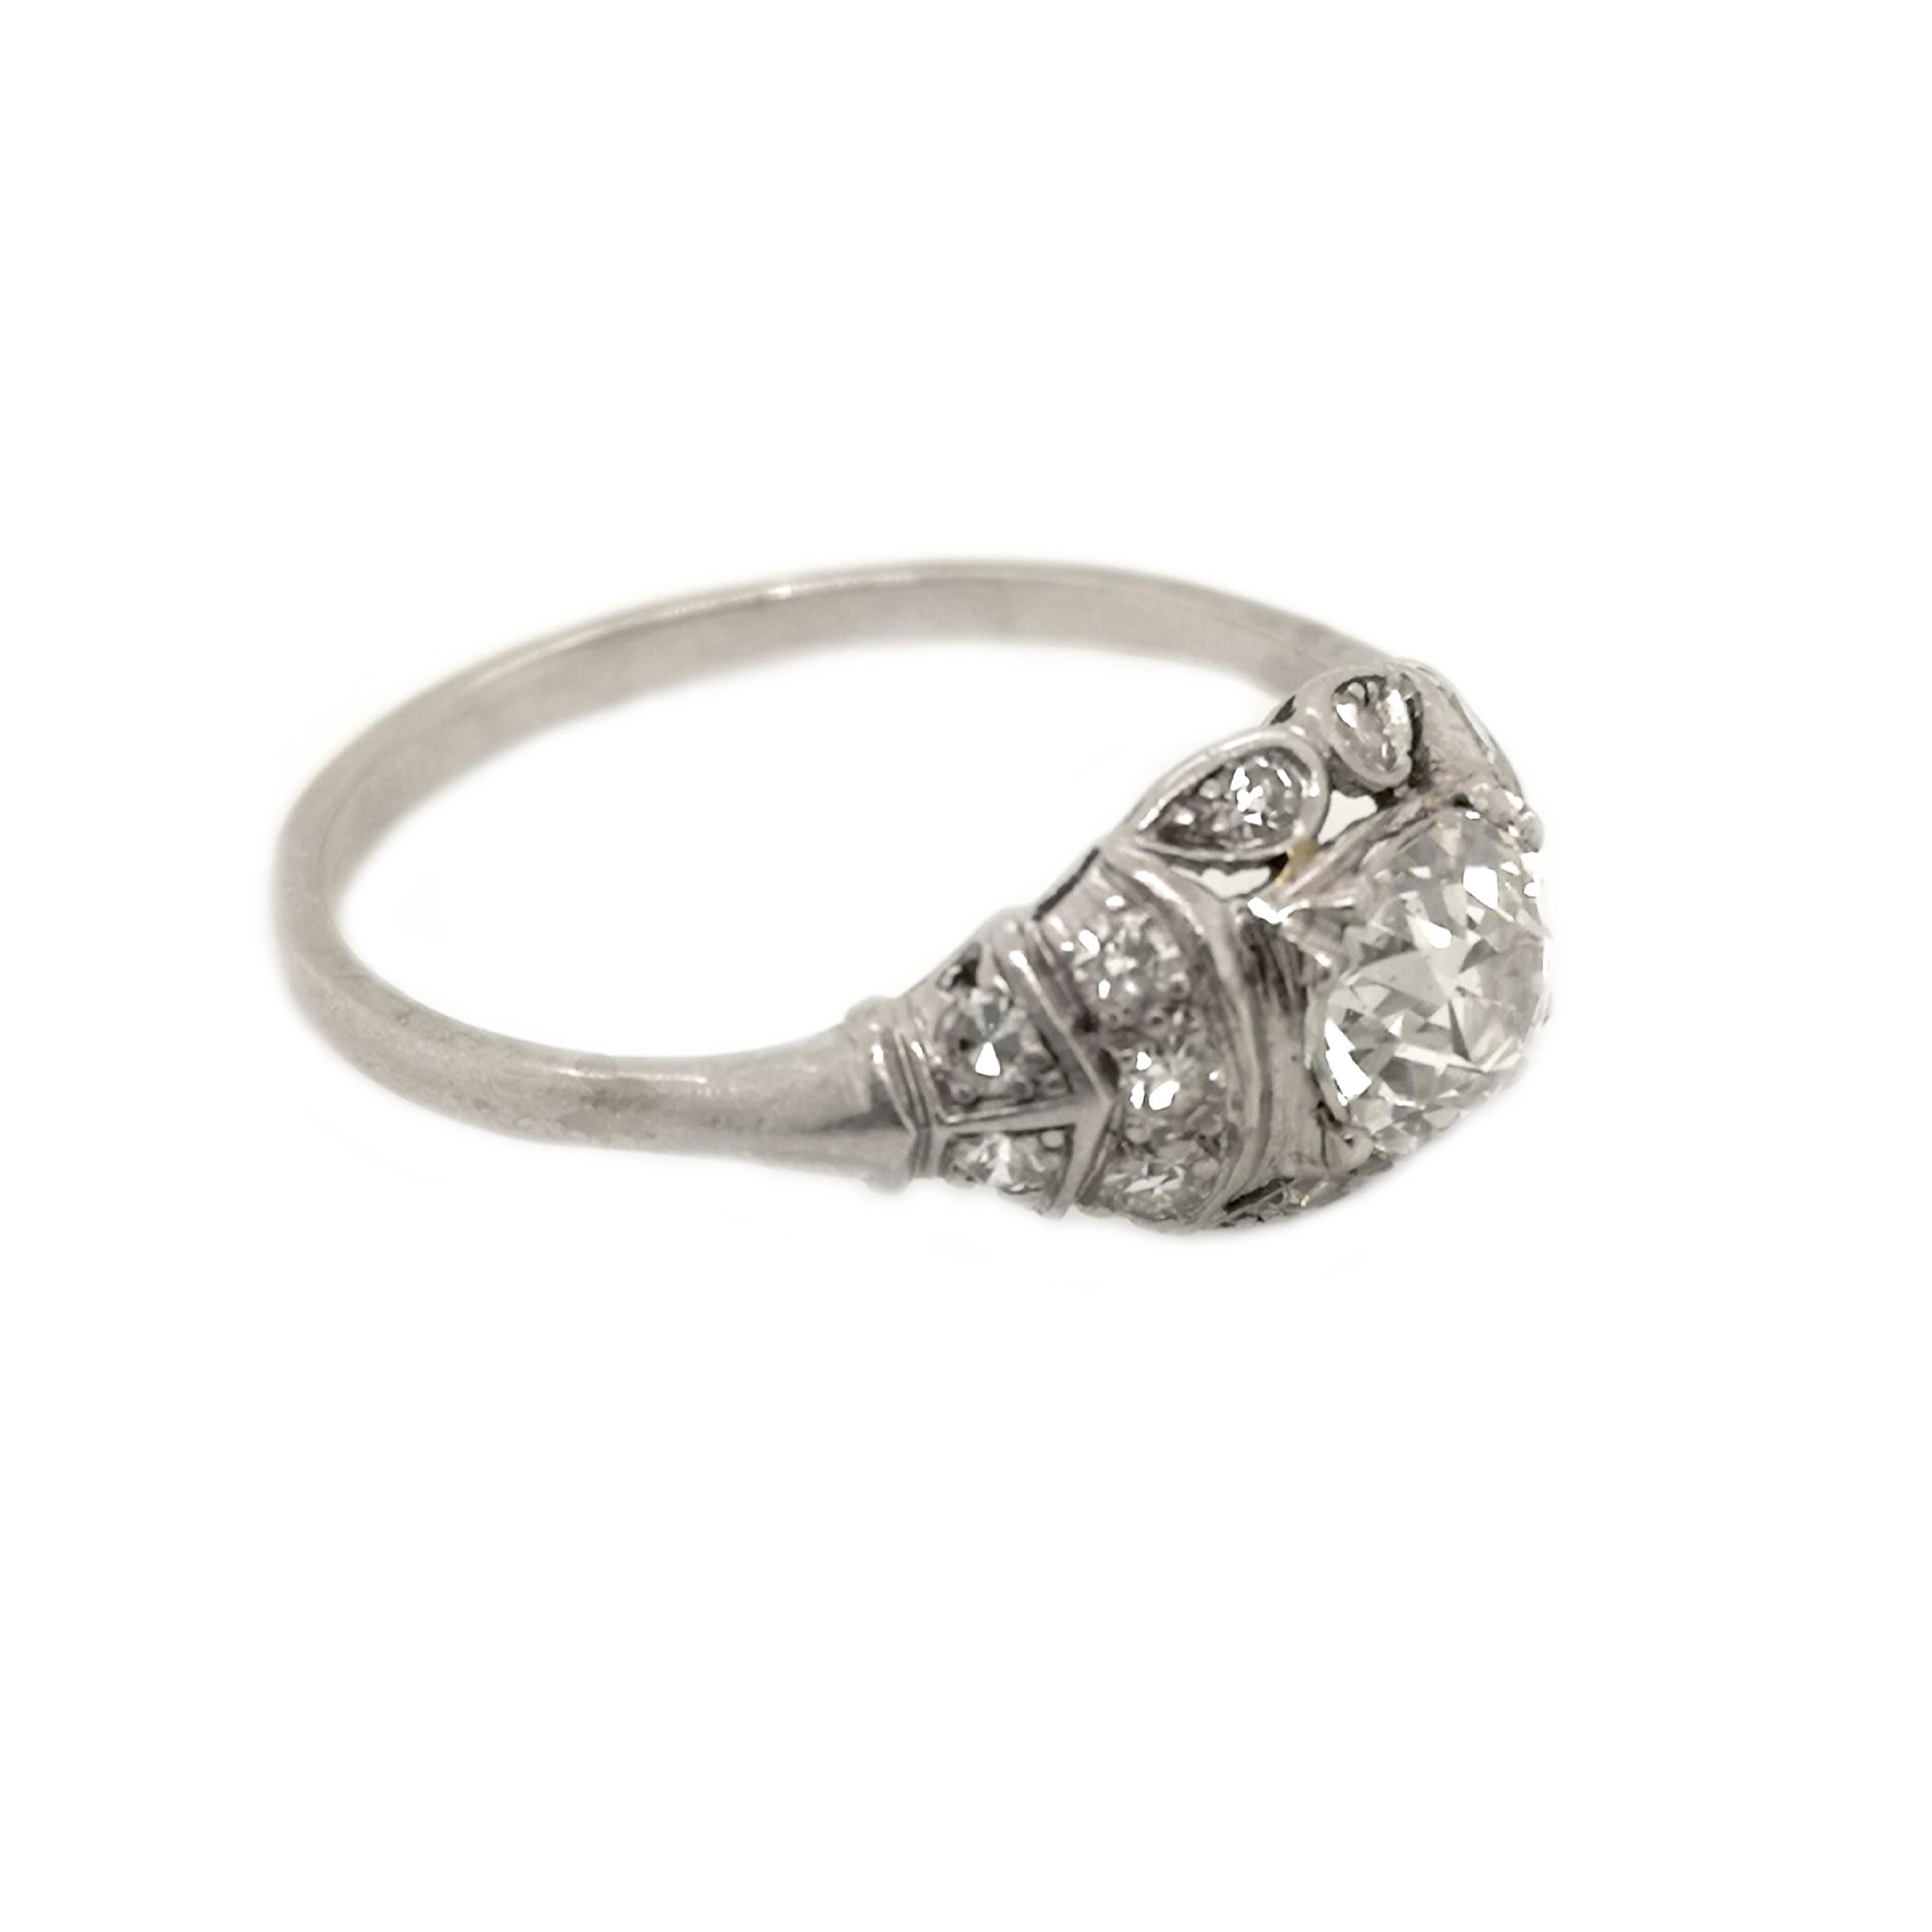 Late Art Deco Diamond and Platinum Ring, 0.85 Carats H SI1, circa 1940 For Sale 1